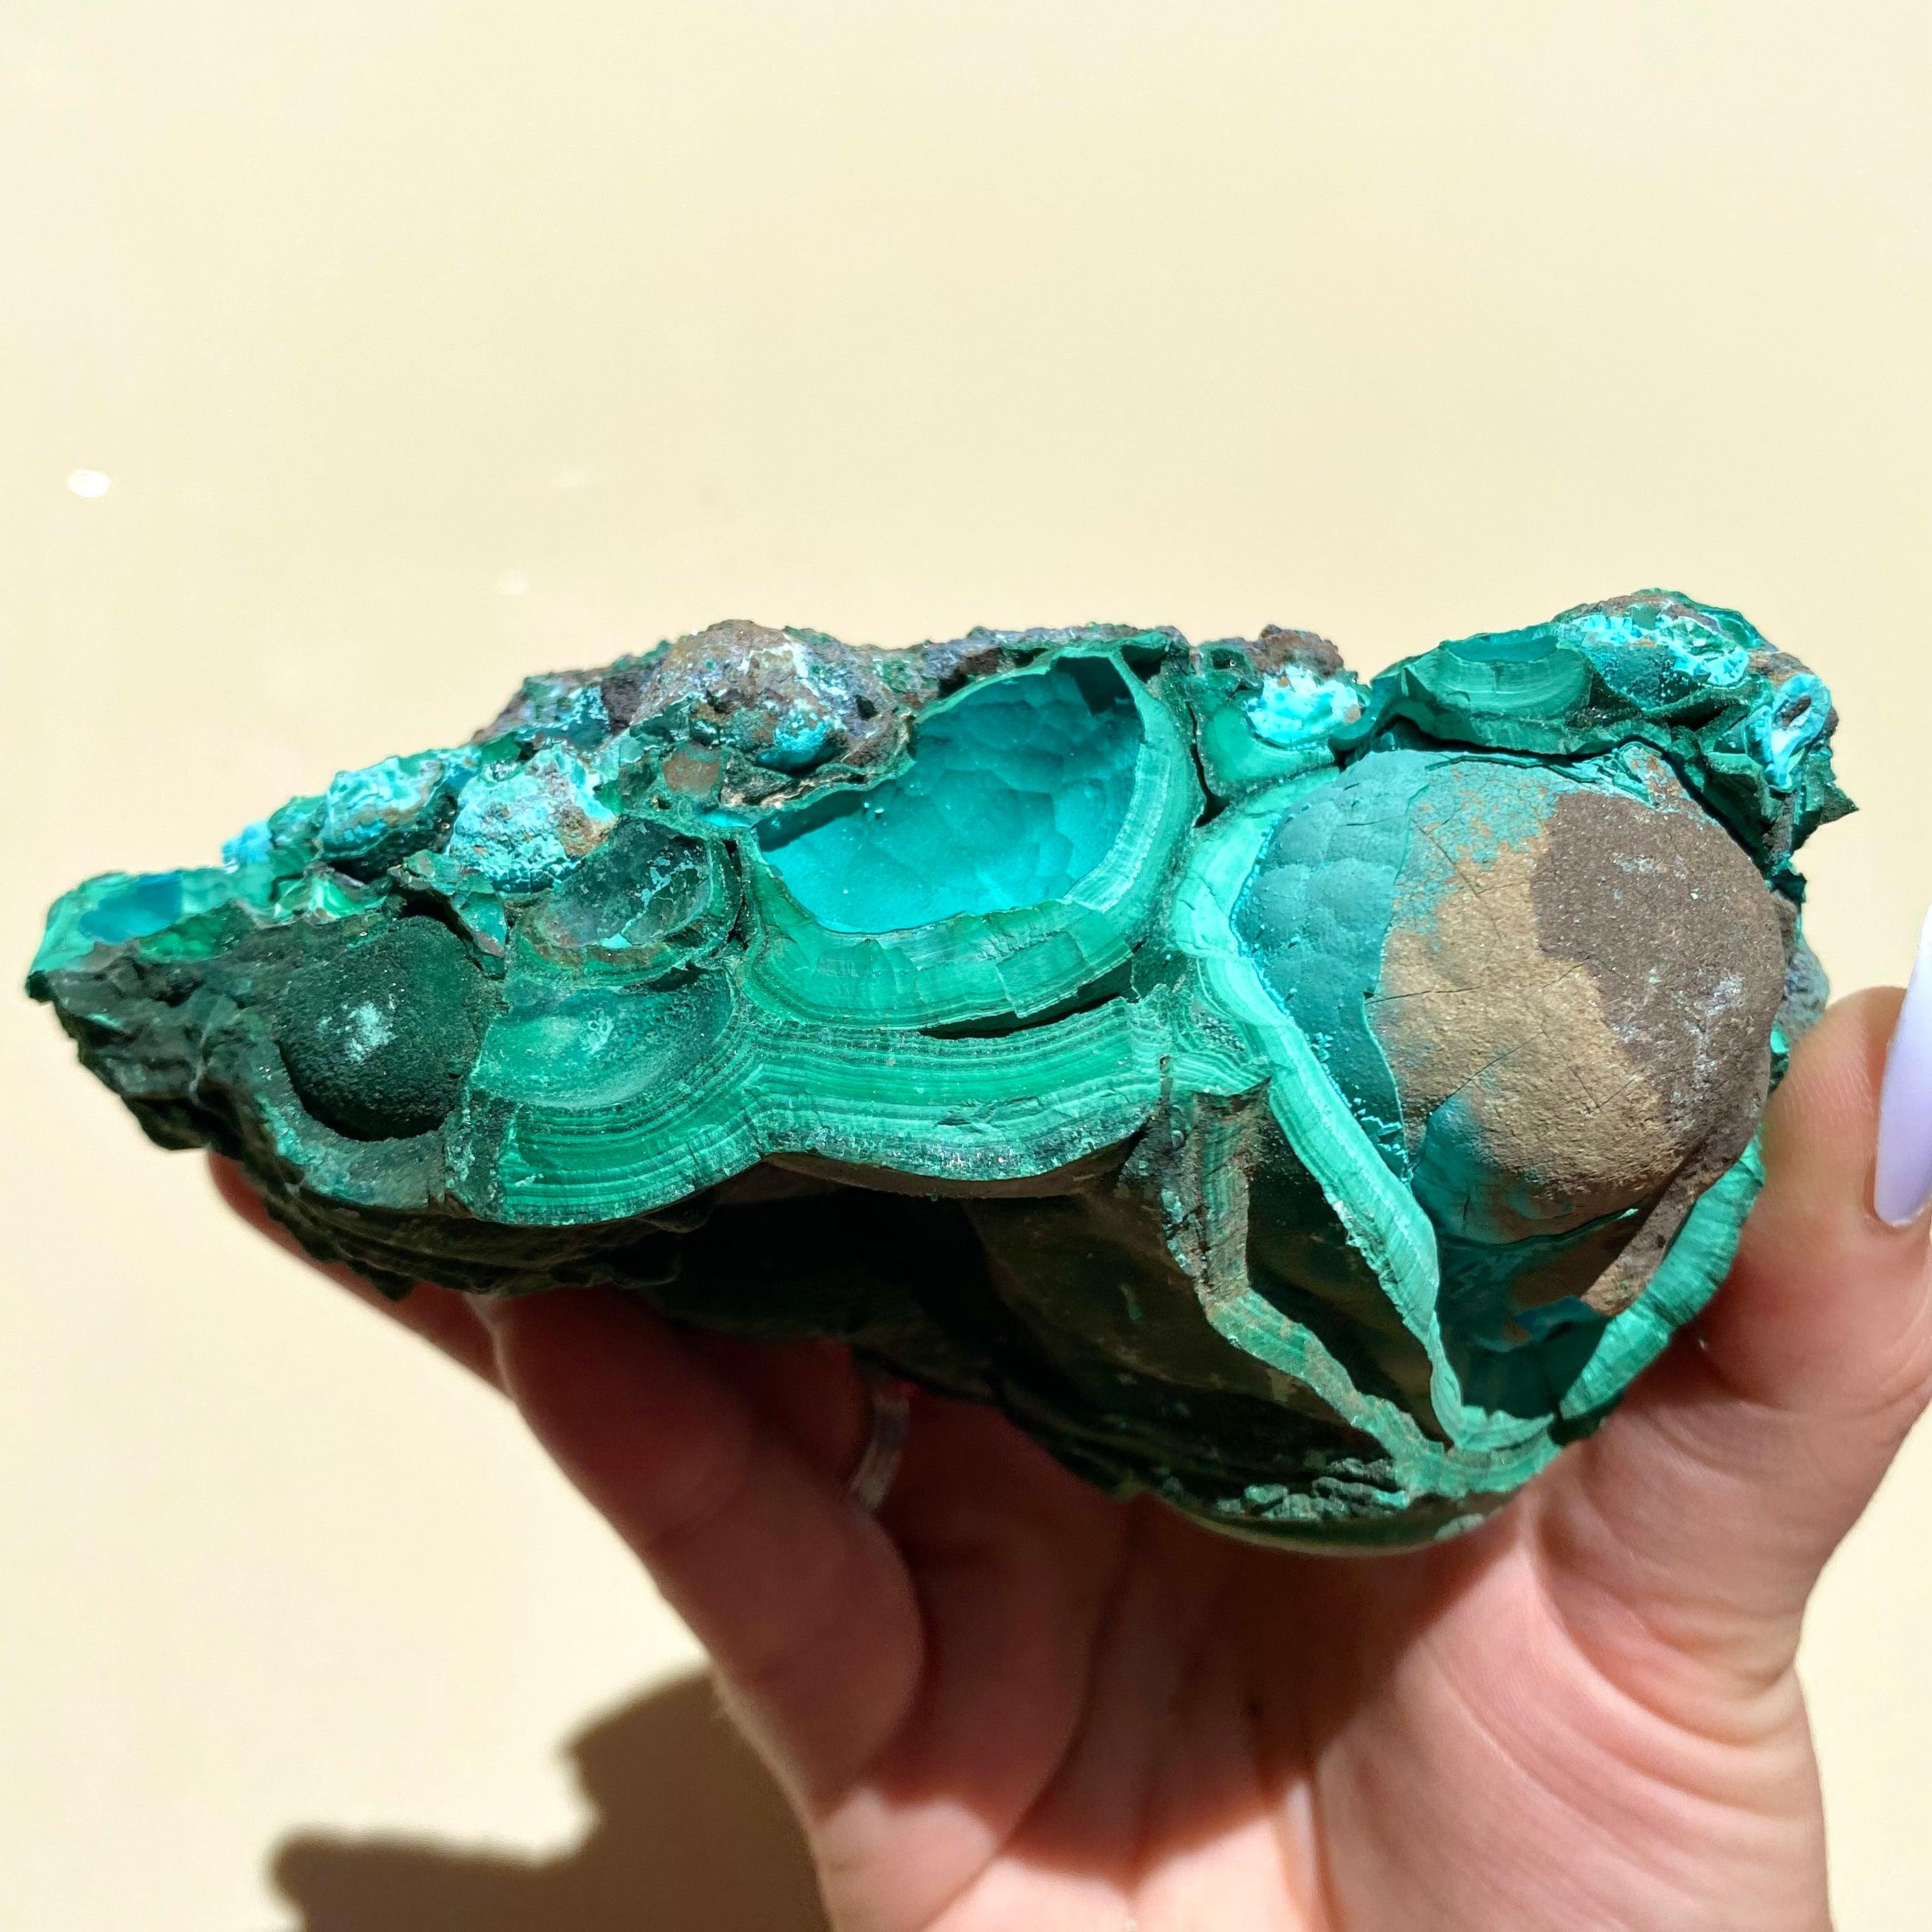 Malachite with Chrysocolla - Ruby's Minerals